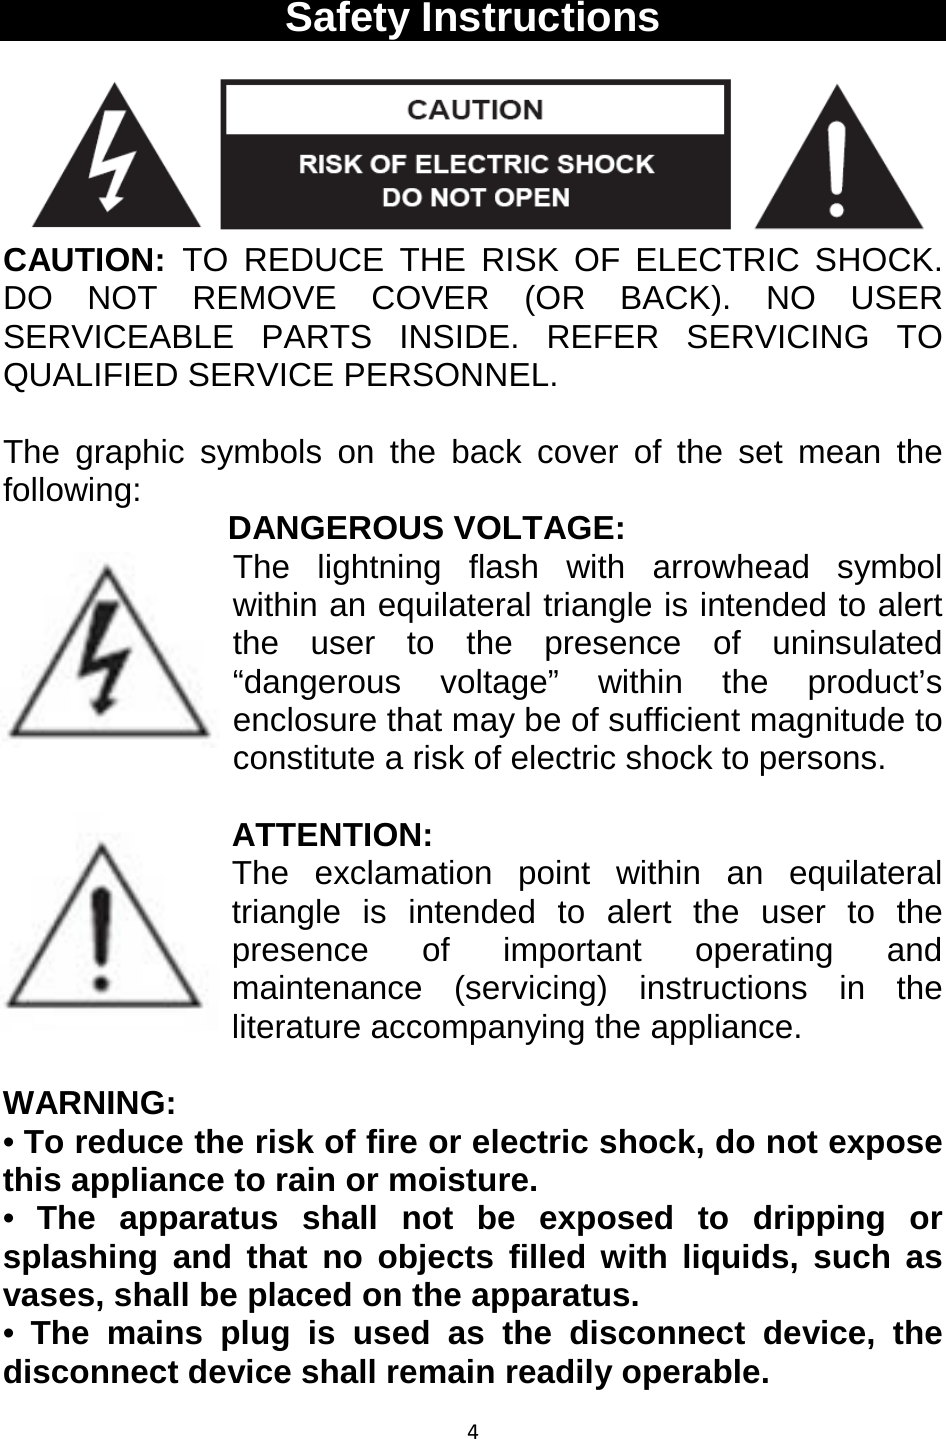 4  Safety Instructions  CAUTION:  TO REDUCE THE RISK OF ELECTRIC SHOCK. DO NOT REMOVE COVER (OR BACK). NO USER SERVICEABLE PARTS INSIDE. REFER SERVICING TO QUALIFIED SERVICE PERSONNEL.  The graphic symbols on the back cover of the set mean the following:  DANGEROUS VOLTAGE: The lightning flash with arrowhead symbol within an equilateral triangle is intended to alert the user to the presence of uninsulated “dangerous voltage” within the product’s enclosure that may be of sufficient magnitude to constitute a risk of electric shock to persons.  ATTENTION: The exclamation point within an equilateral triangle is intended to alert the user to the presence of important operating and maintenance (servicing) instructions in the literature accompanying the appliance.   WARNING: • To reduce the risk of fire or electric shock, do not expose this appliance to rain or moisture. •  The apparatus shall not be exposed to dripping or splashing and that no objects filled with liquids, such as vases, shall be placed on the apparatus. •  The mains plug is used as the disconnect device, the disconnect device shall remain readily operable. 